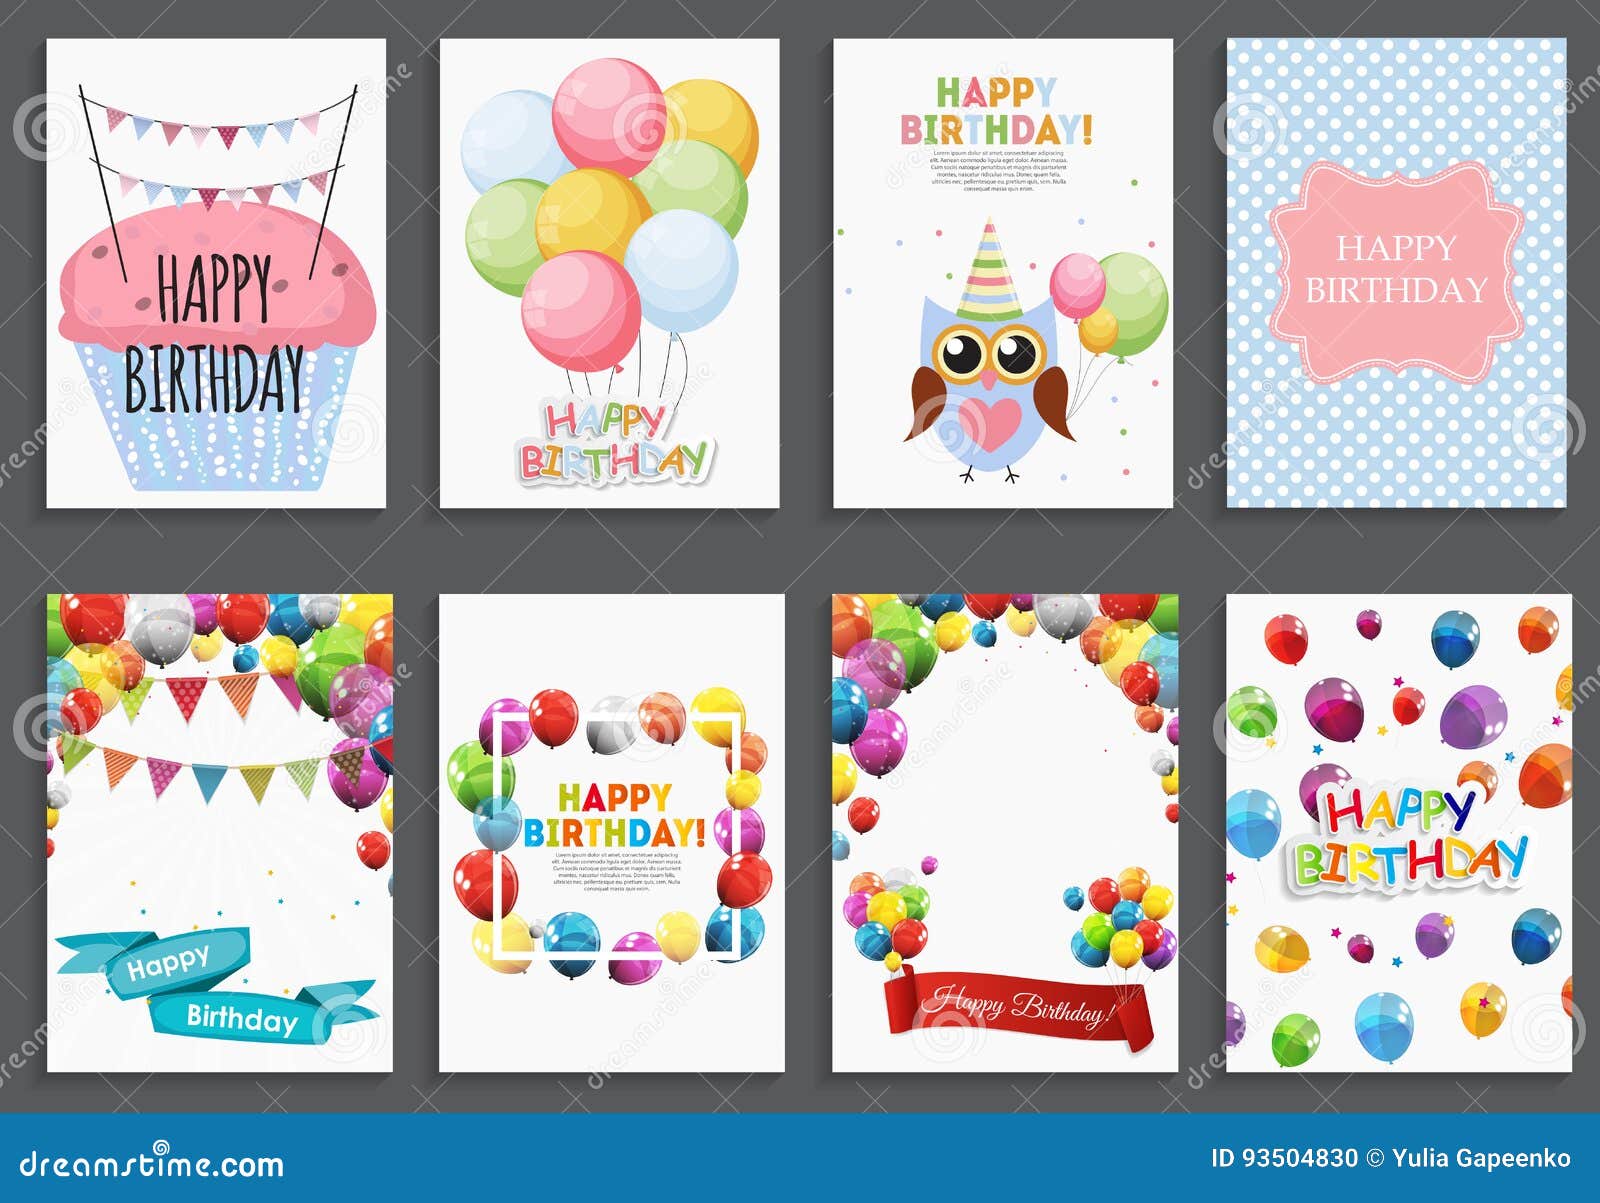 Happy Birthday Invitation Card Template, Vector Illustration of Birthday  Party Background Stock Vector - Illustration of cards, decoration: 114257073